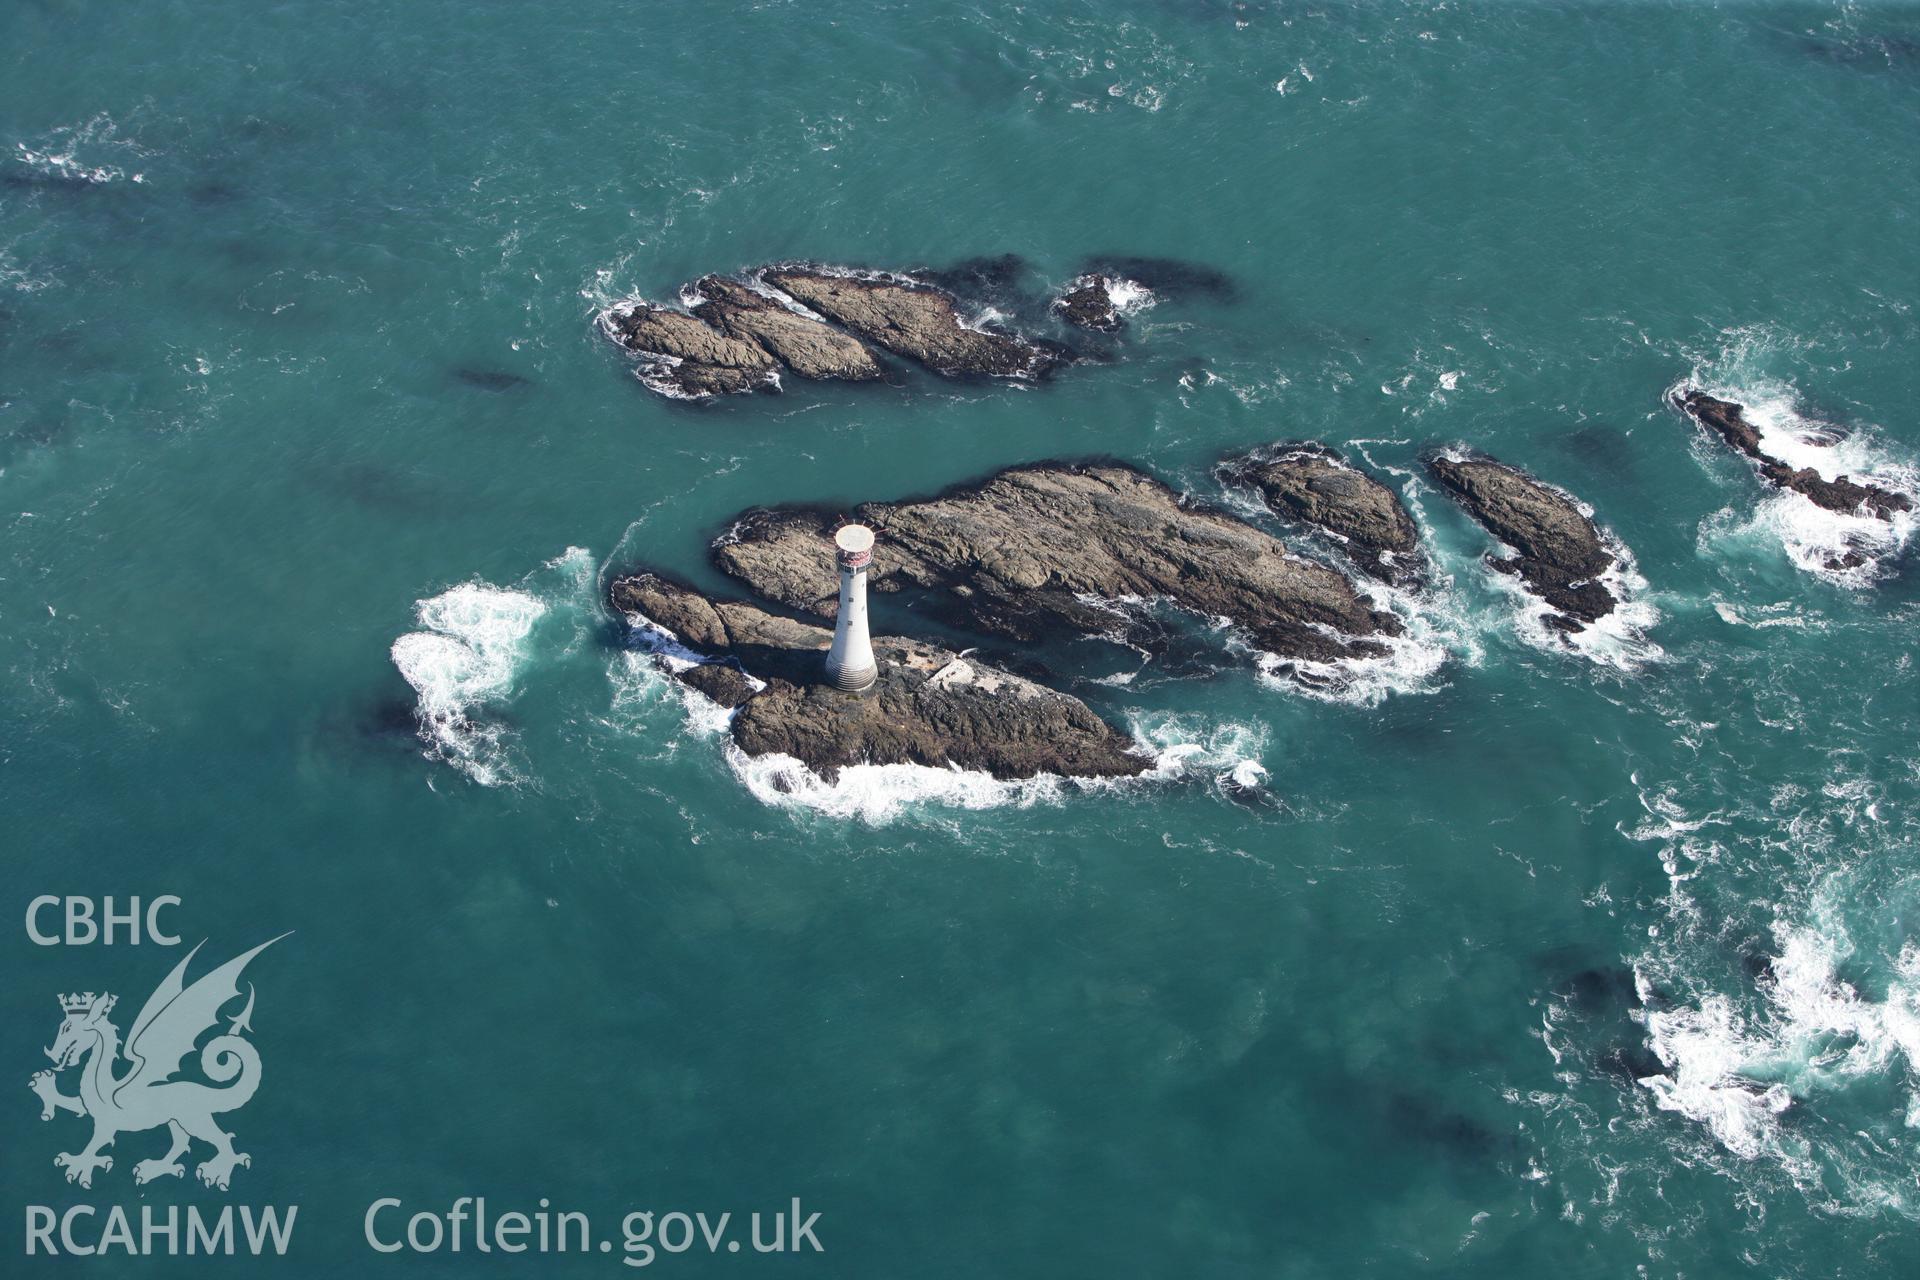 RCAHMW colour oblique photograph of The Smalls Lighthouse, west of Skomer Island. Taken by Toby Driver on 09/09/2010.